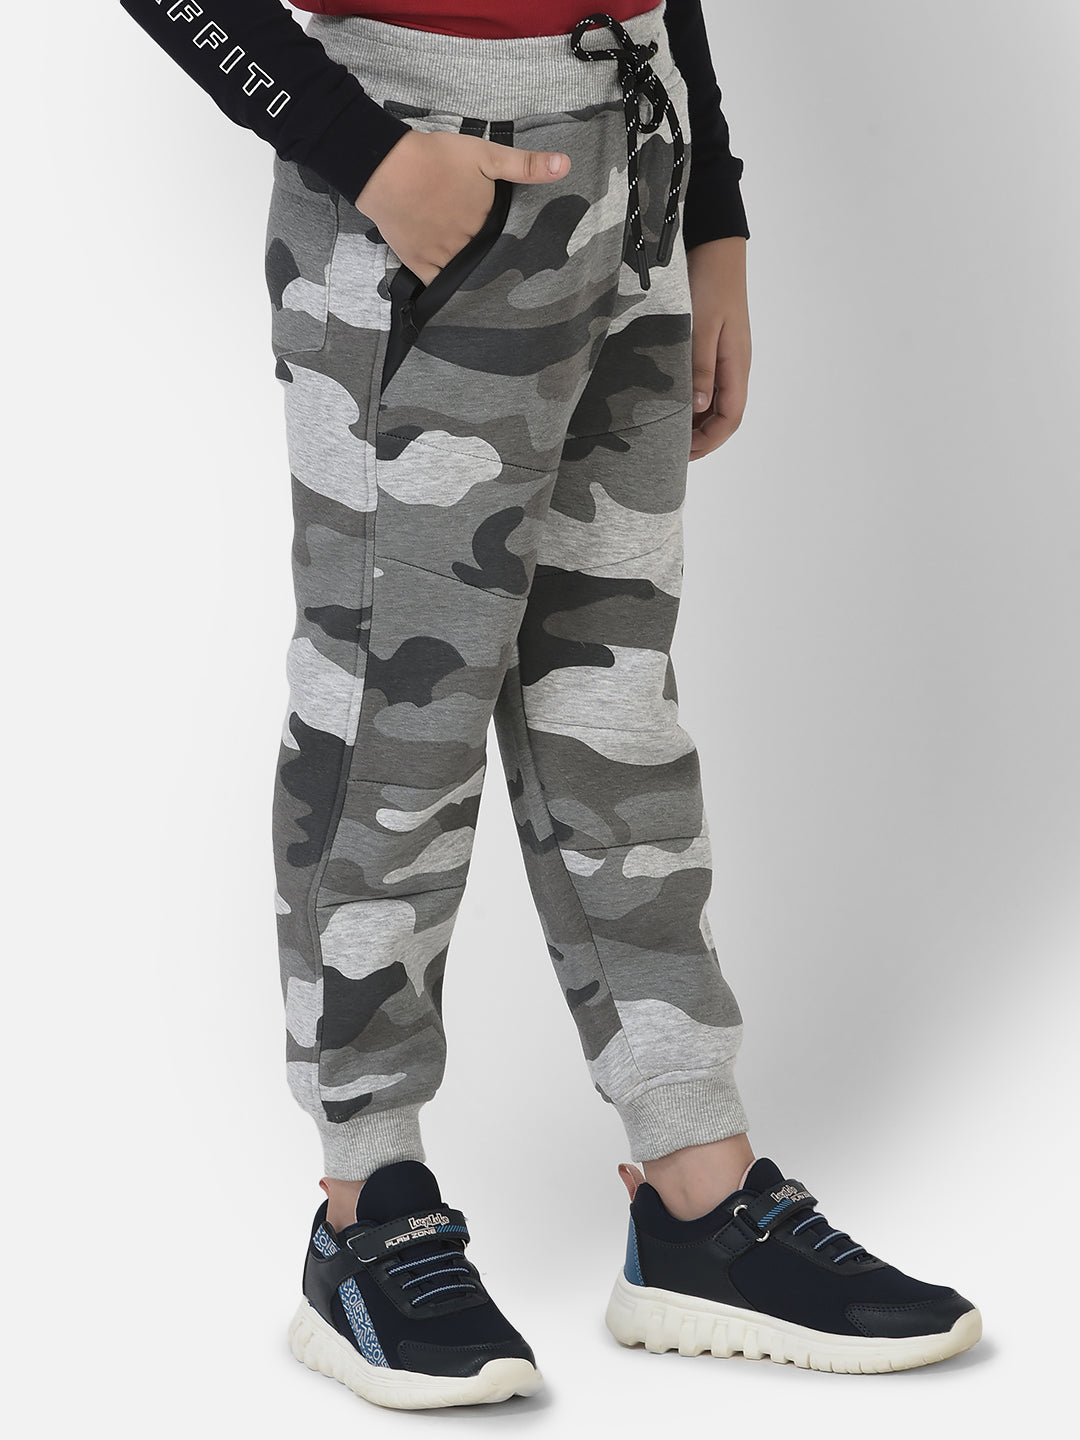 Grey Joggers in Camouflage Print 